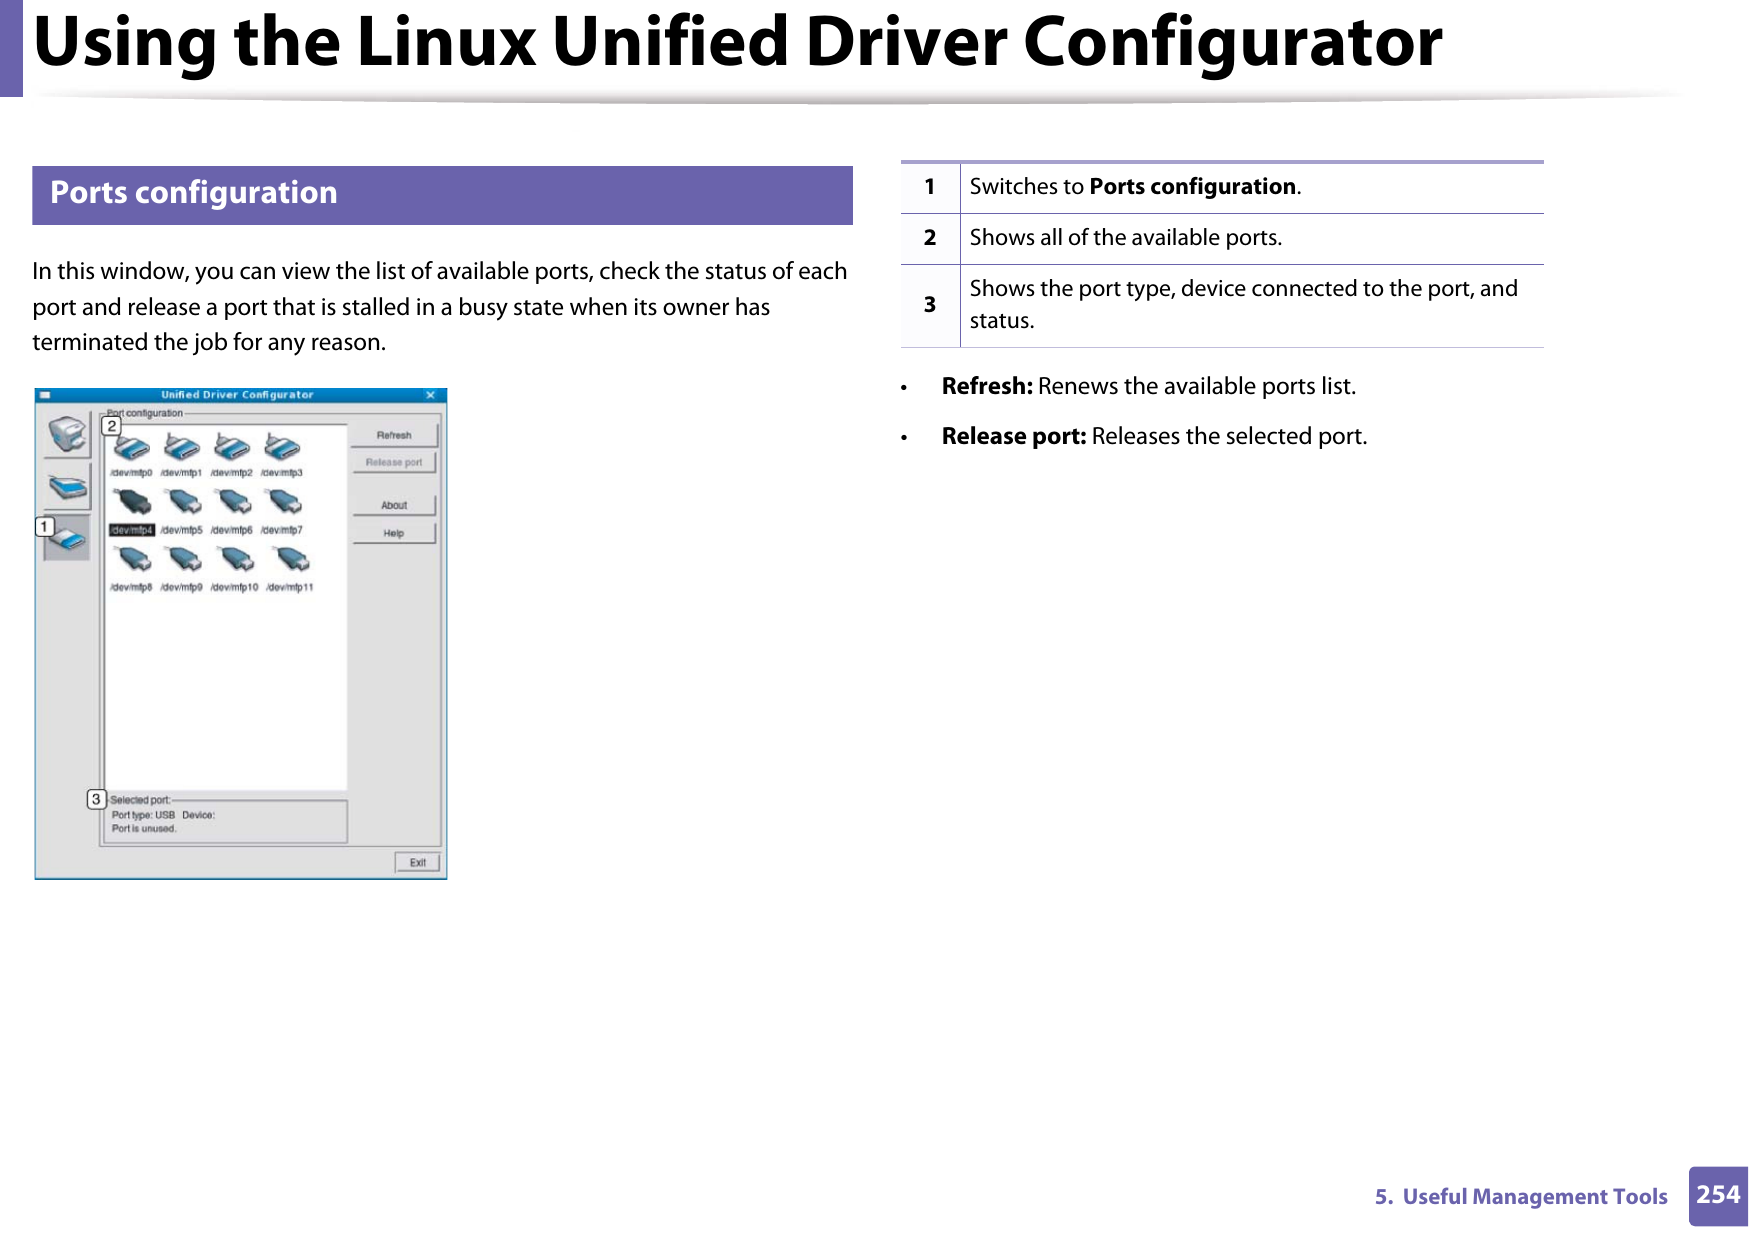 Using the Linux Unified Driver Configurator2545.  Useful Management Tools14 Ports configurationIn this window, you can view the list of available ports, check the status of each port and release a port that is stalled in a busy state when its owner has terminated the job for any reason.•Refresh: Renews the available ports list.•Release port: Releases the selected port.1Switches to Ports configuration.2Shows all of the available ports.3Shows the port type, device connected to the port, and status.